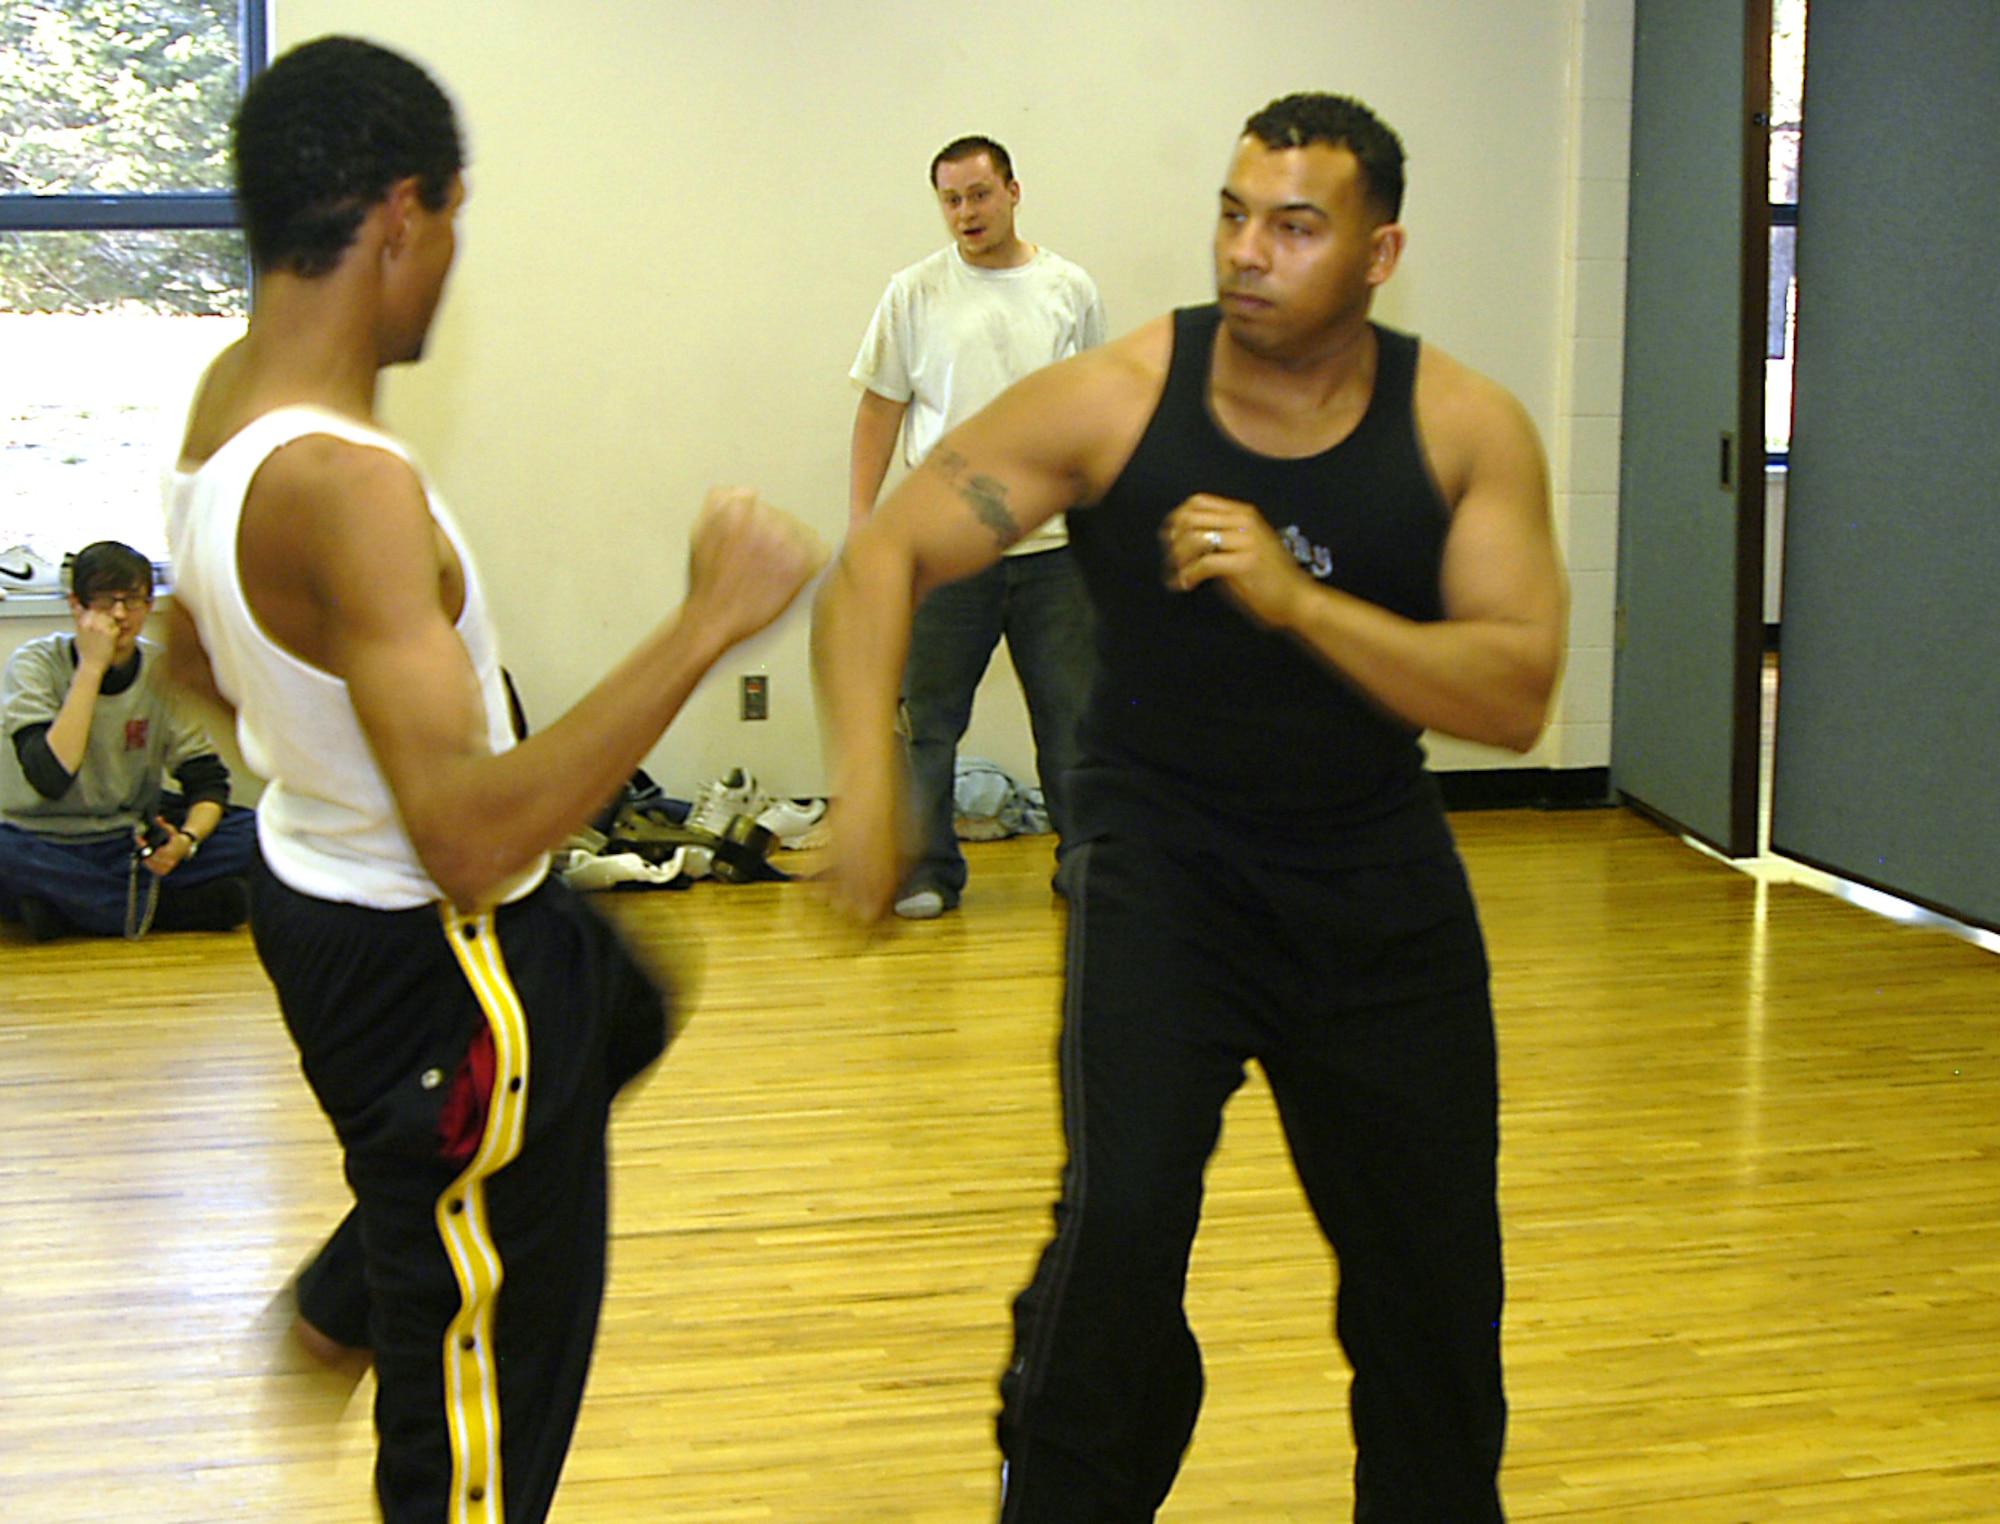 Staff Sgt. Dave Armstrong, right, spars with Santiago, 18, at a local community center in Colorado Springs, Colo., on Tuesday, April 11, 2006. Sergeant Armstrong, known to his students as Sensei Dave, teaches martial-arts classes for at-risk teens. Sergeant Armstrong is an information manager with Detachment 2 of the 17th Test Squadron at Cheyenne Mountain Air Force Station, Colo. (U.S. Air Force photo/Staff Sgt. Don Branum)